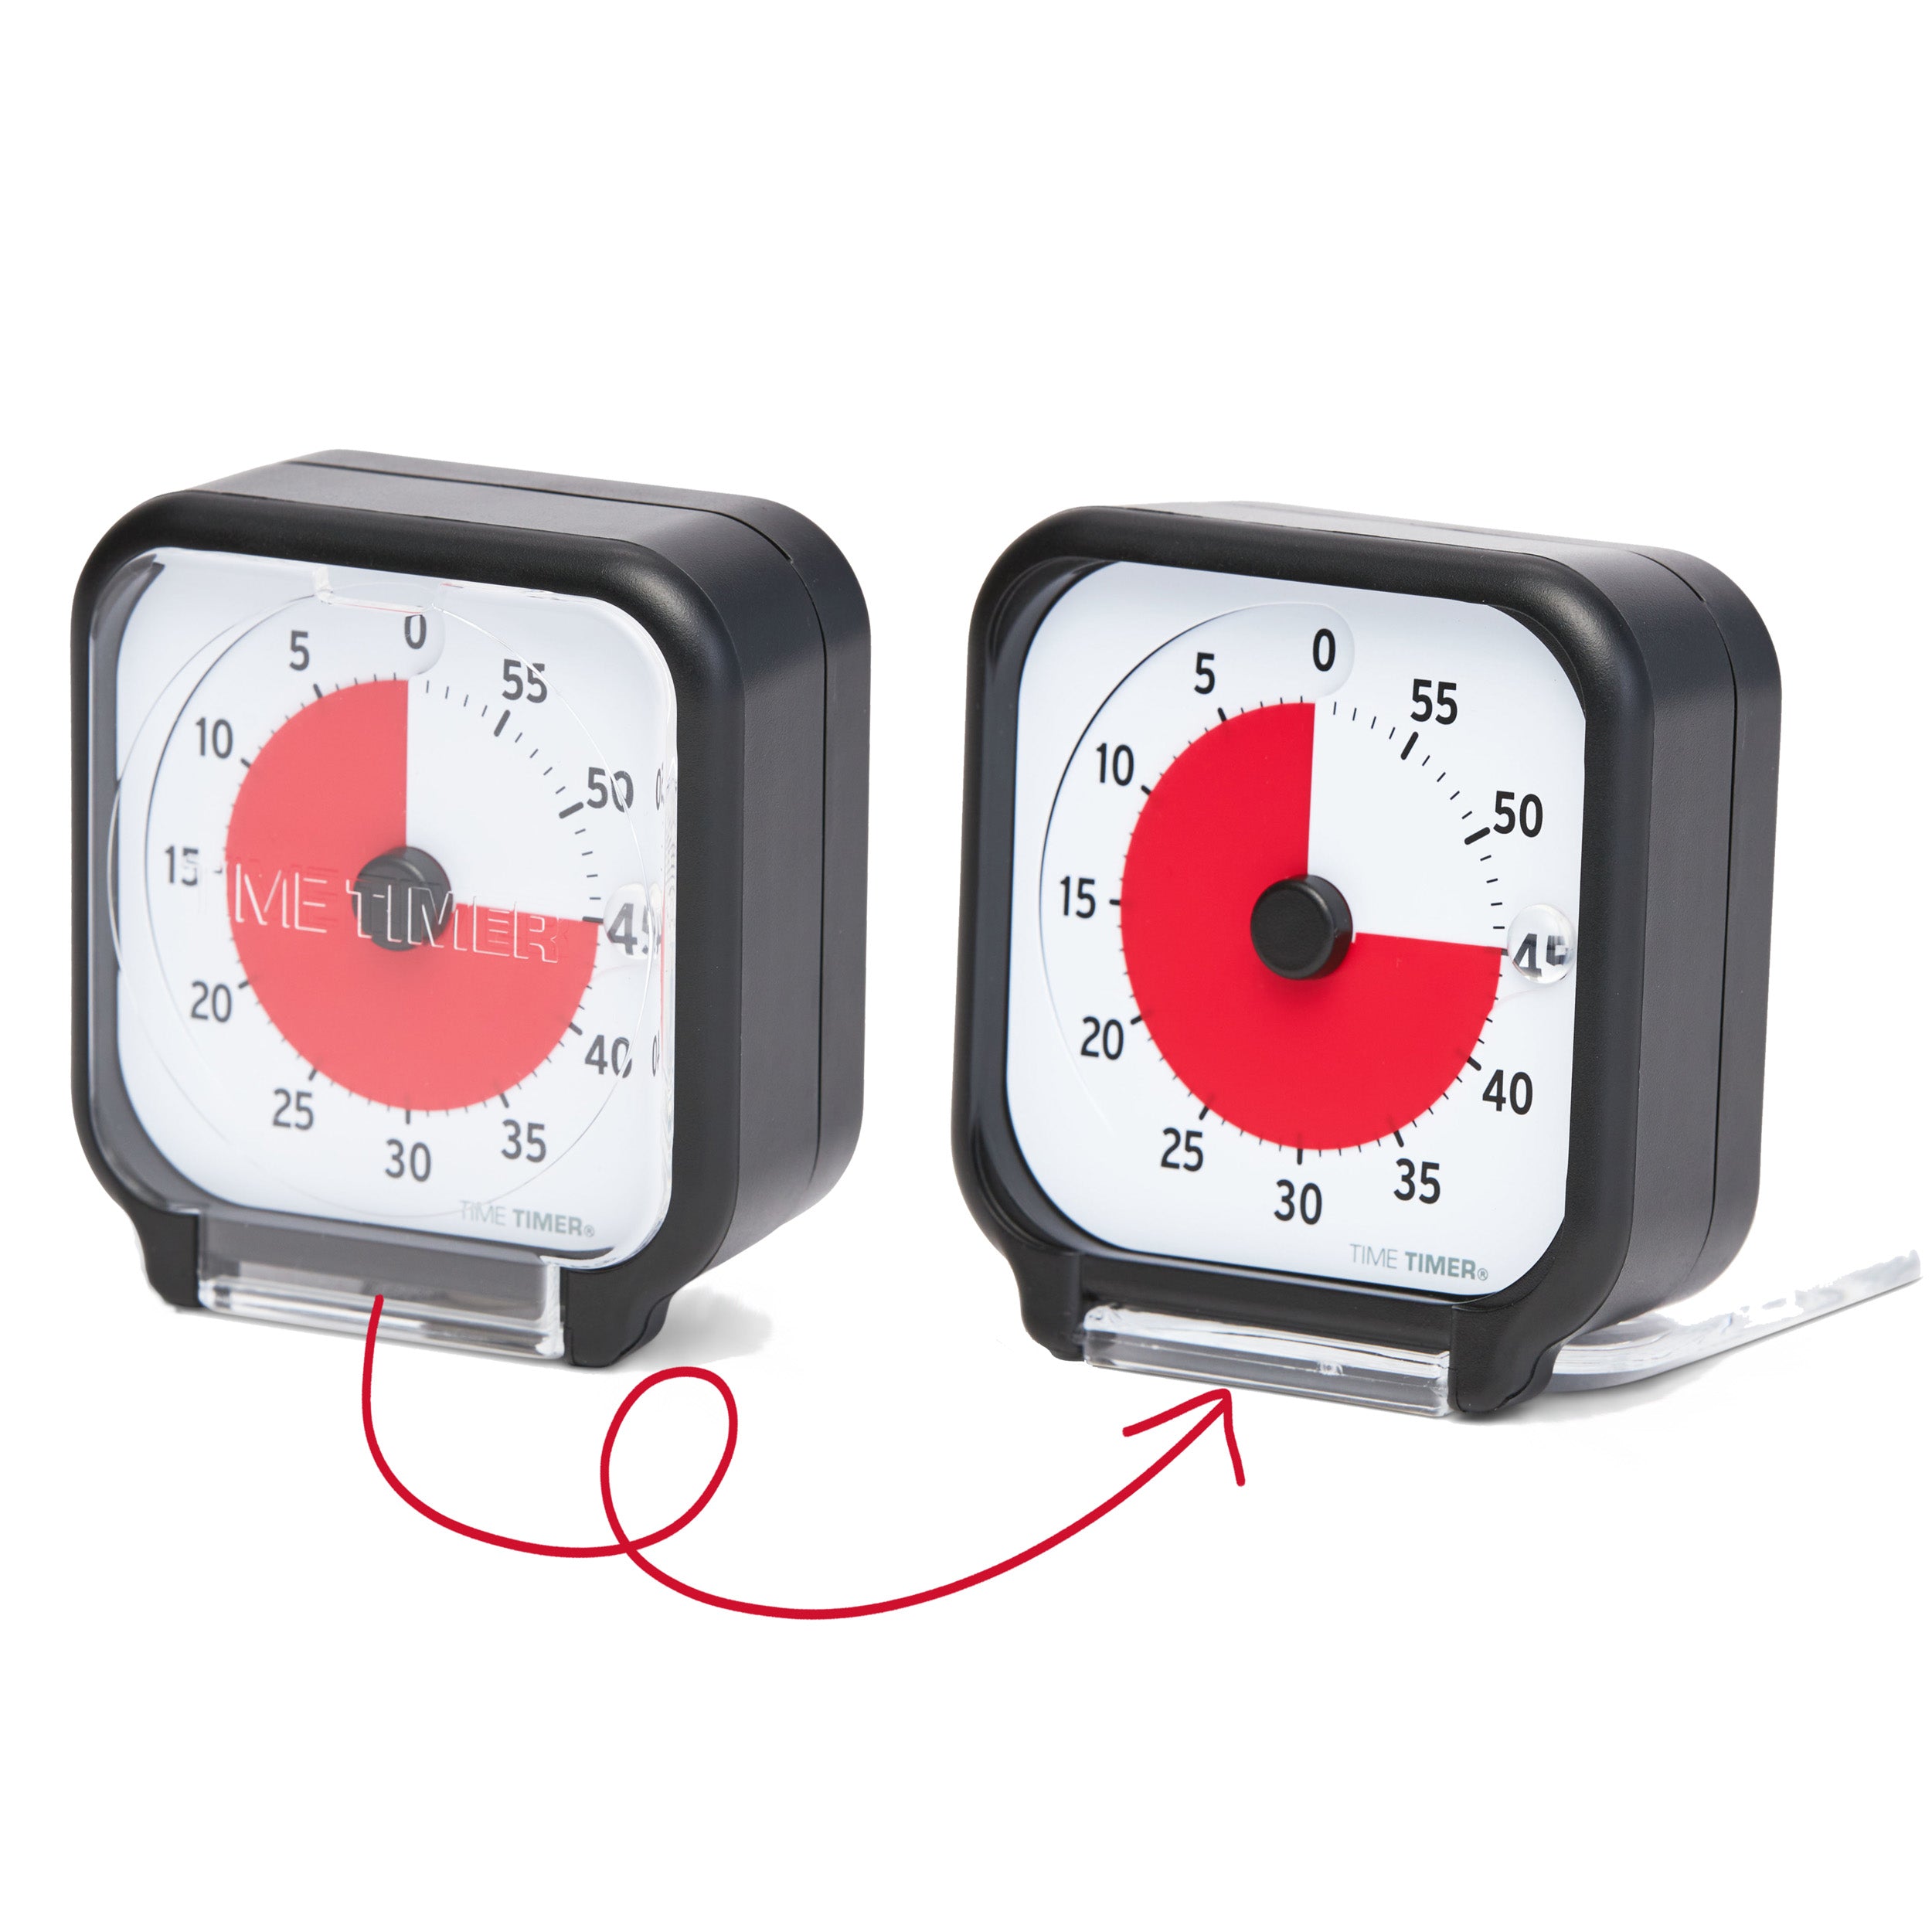 Time Timer Original 3 inch Visual Timer - Pocket. The Time Timer 3-inch has a clear lid. When closed, it protects the timer, and the red disk can be seen through it. When it is open, it folds under the timer, and acts as a stand for the timer to be placed on any flat surface.